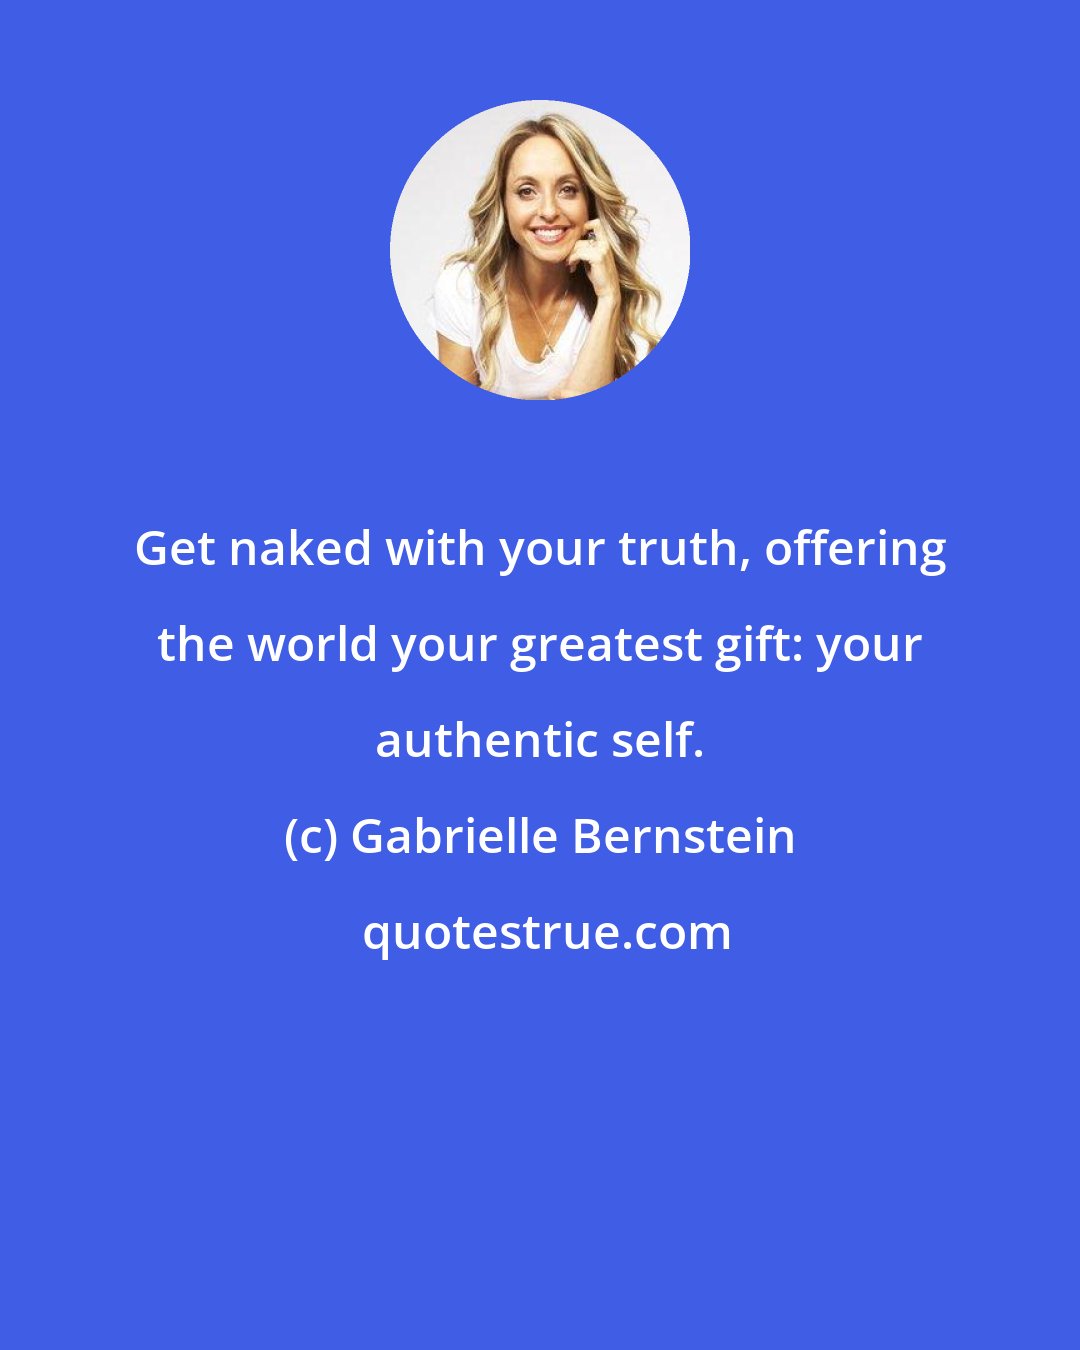 Gabrielle Bernstein: Get naked with your truth, offering the world your greatest gift: your authentic self.